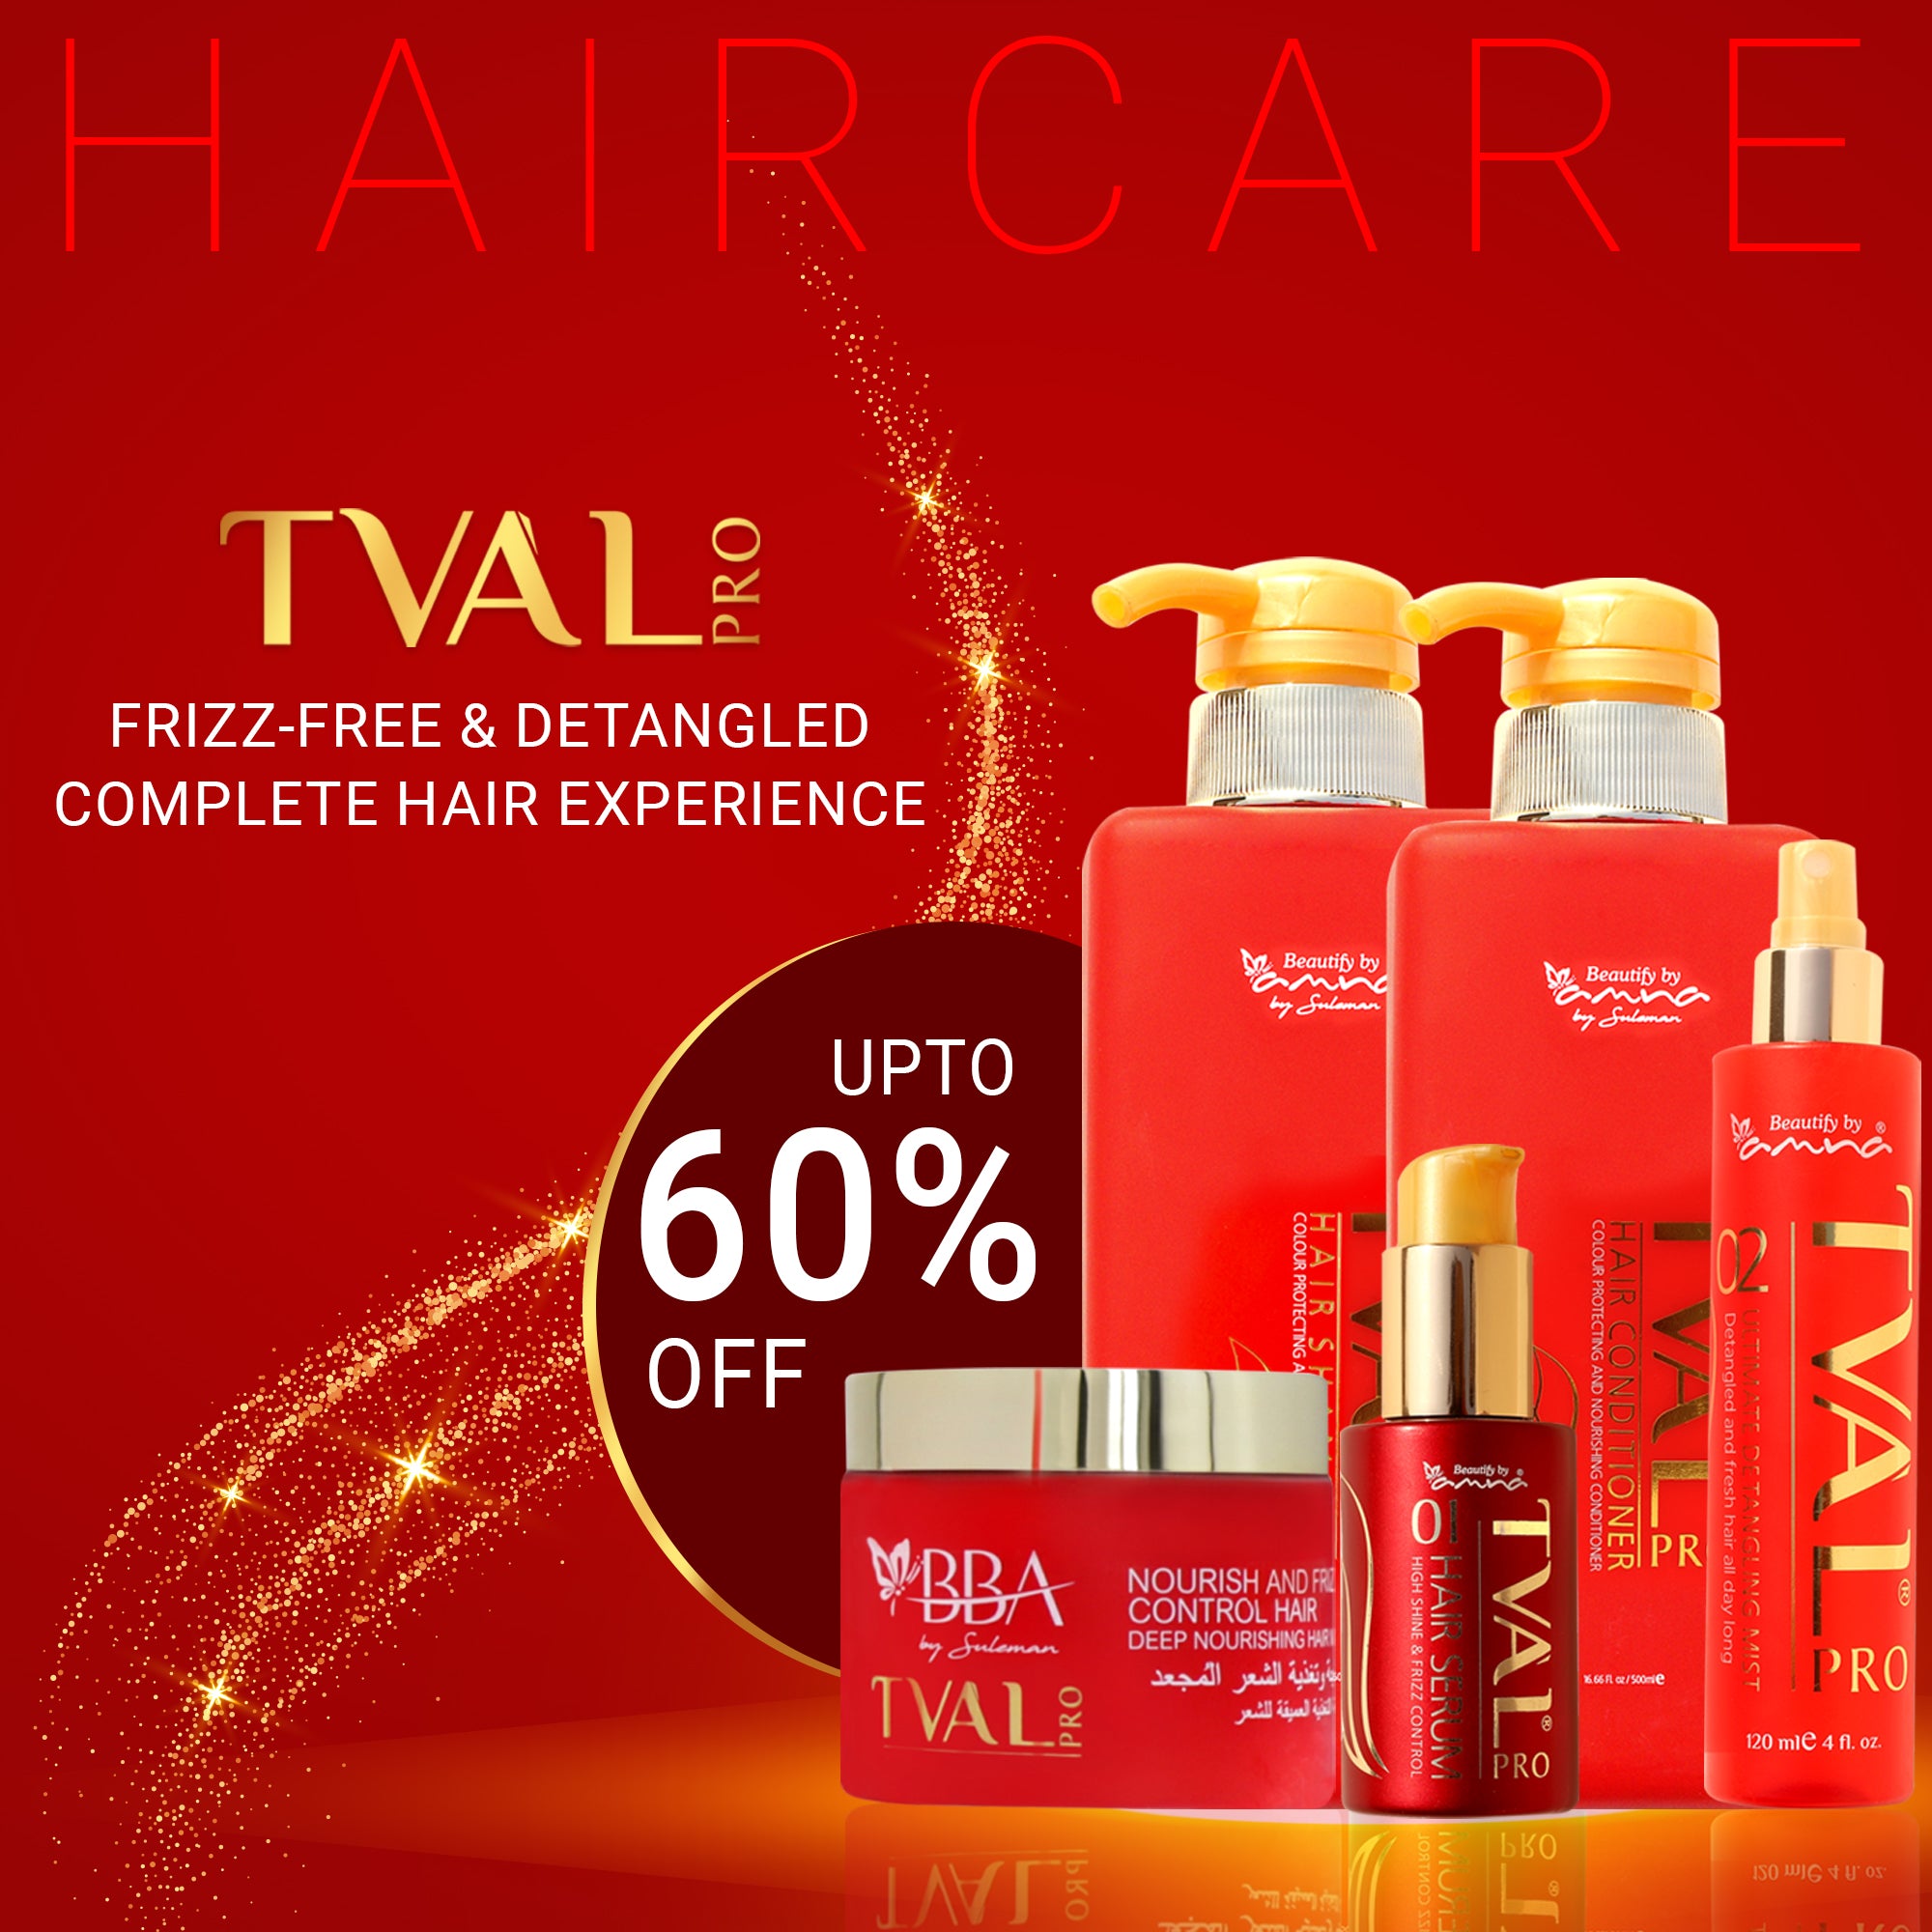 FRIZZ-FREE & DETANGLED COMPLETE HAIR EXPERIENCE